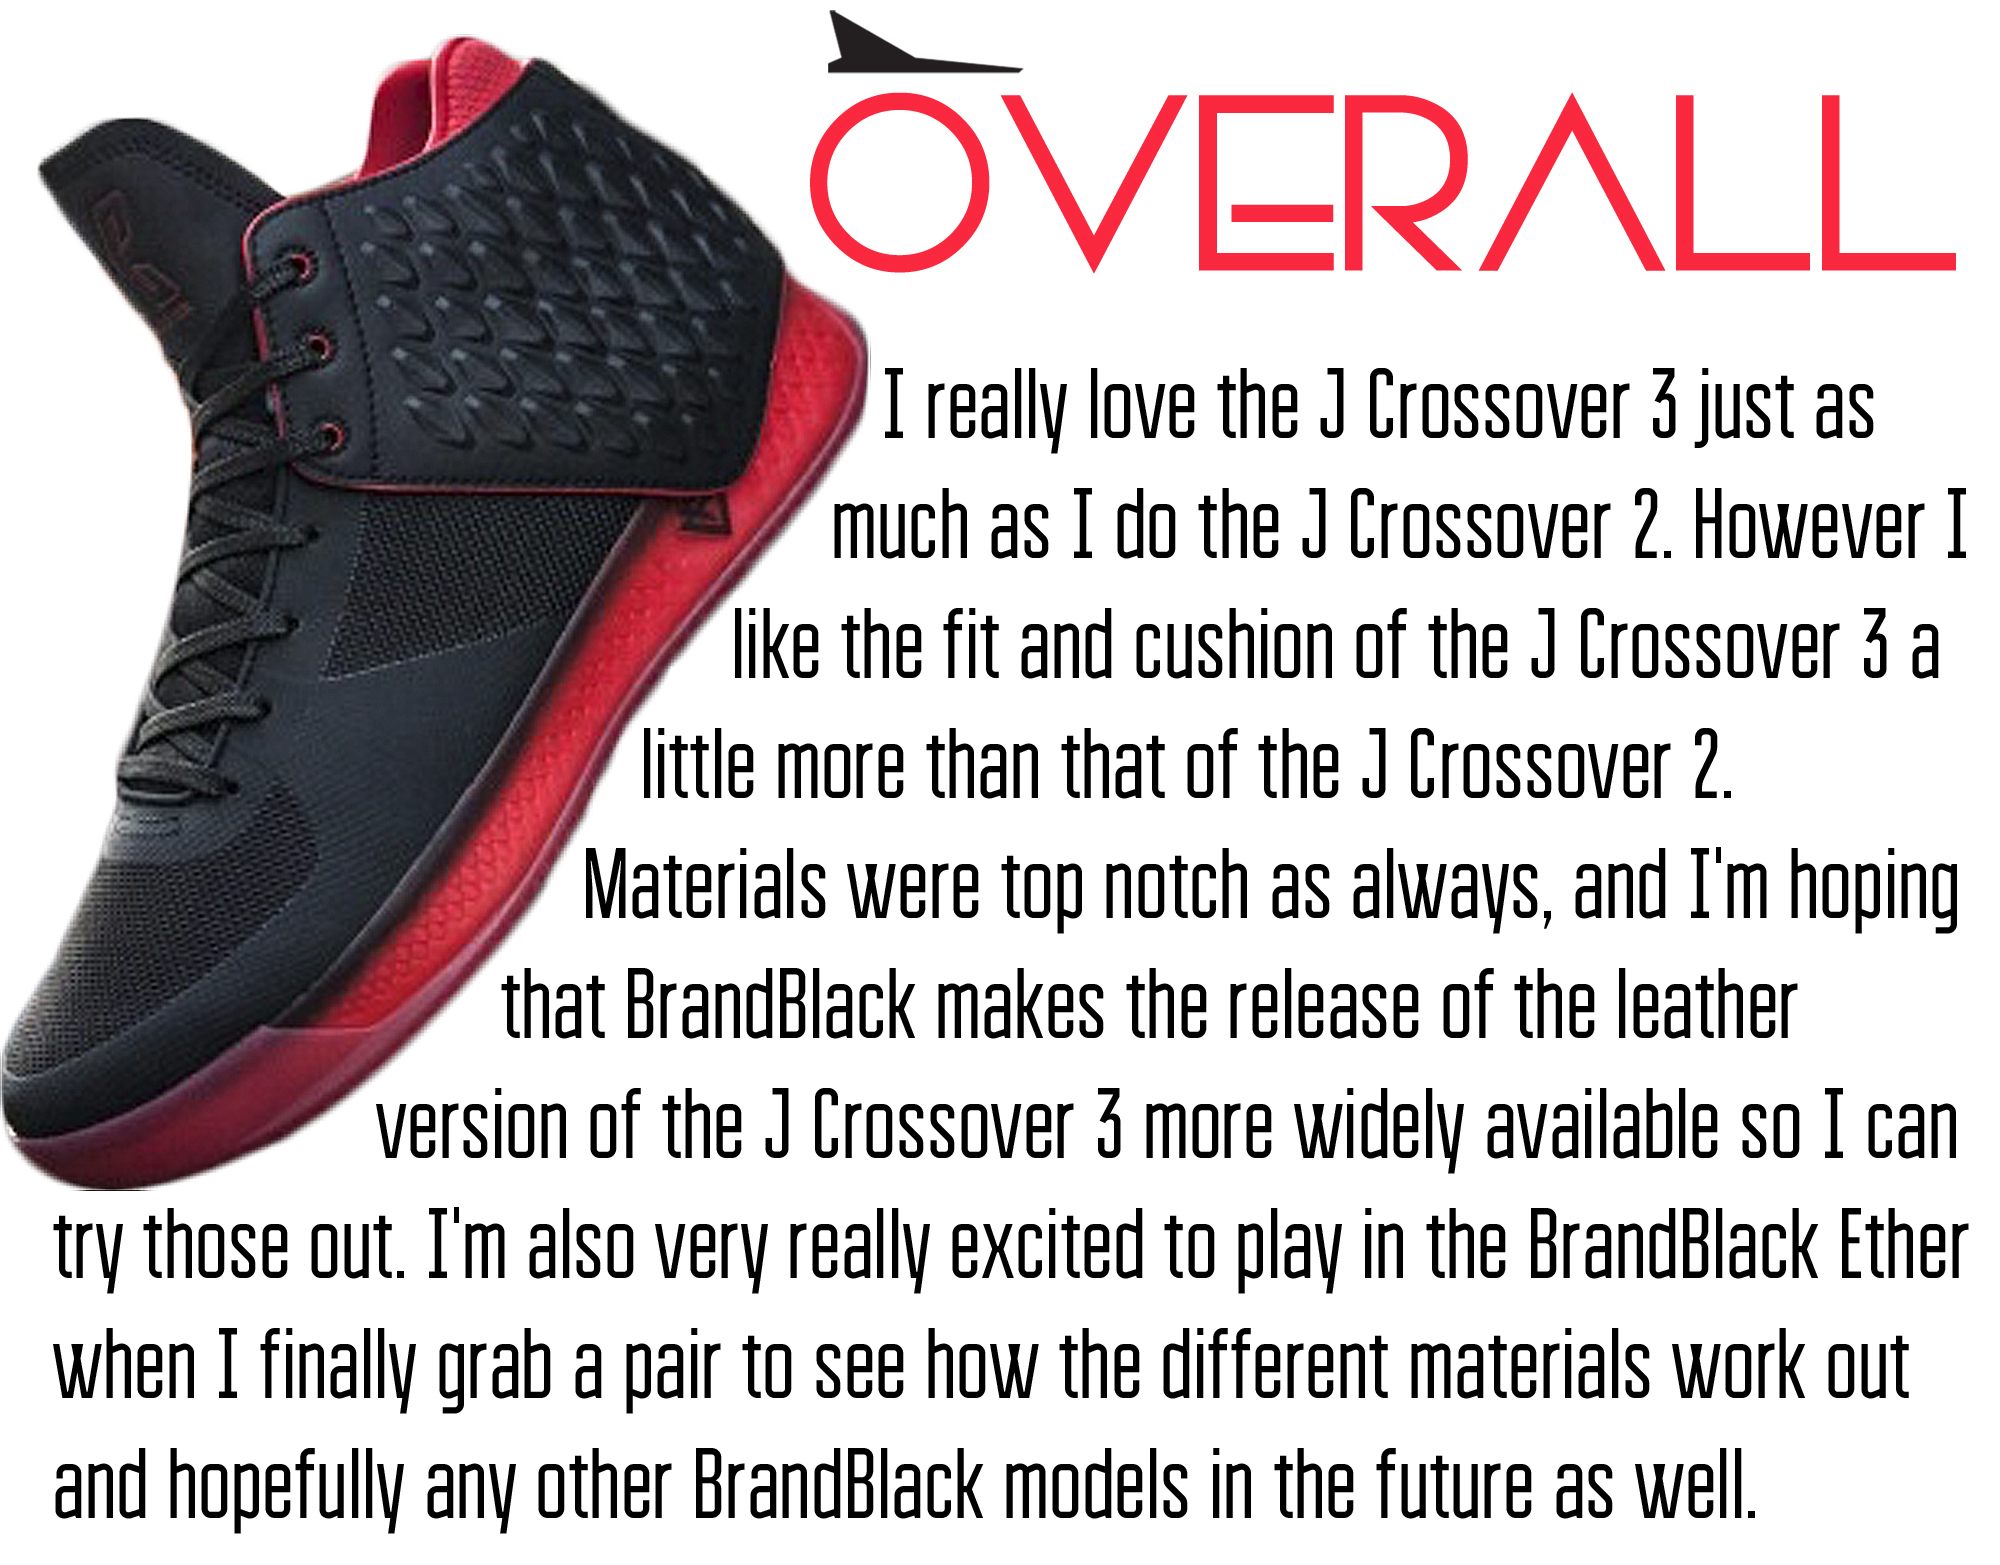 J Crossover 3 - Overall